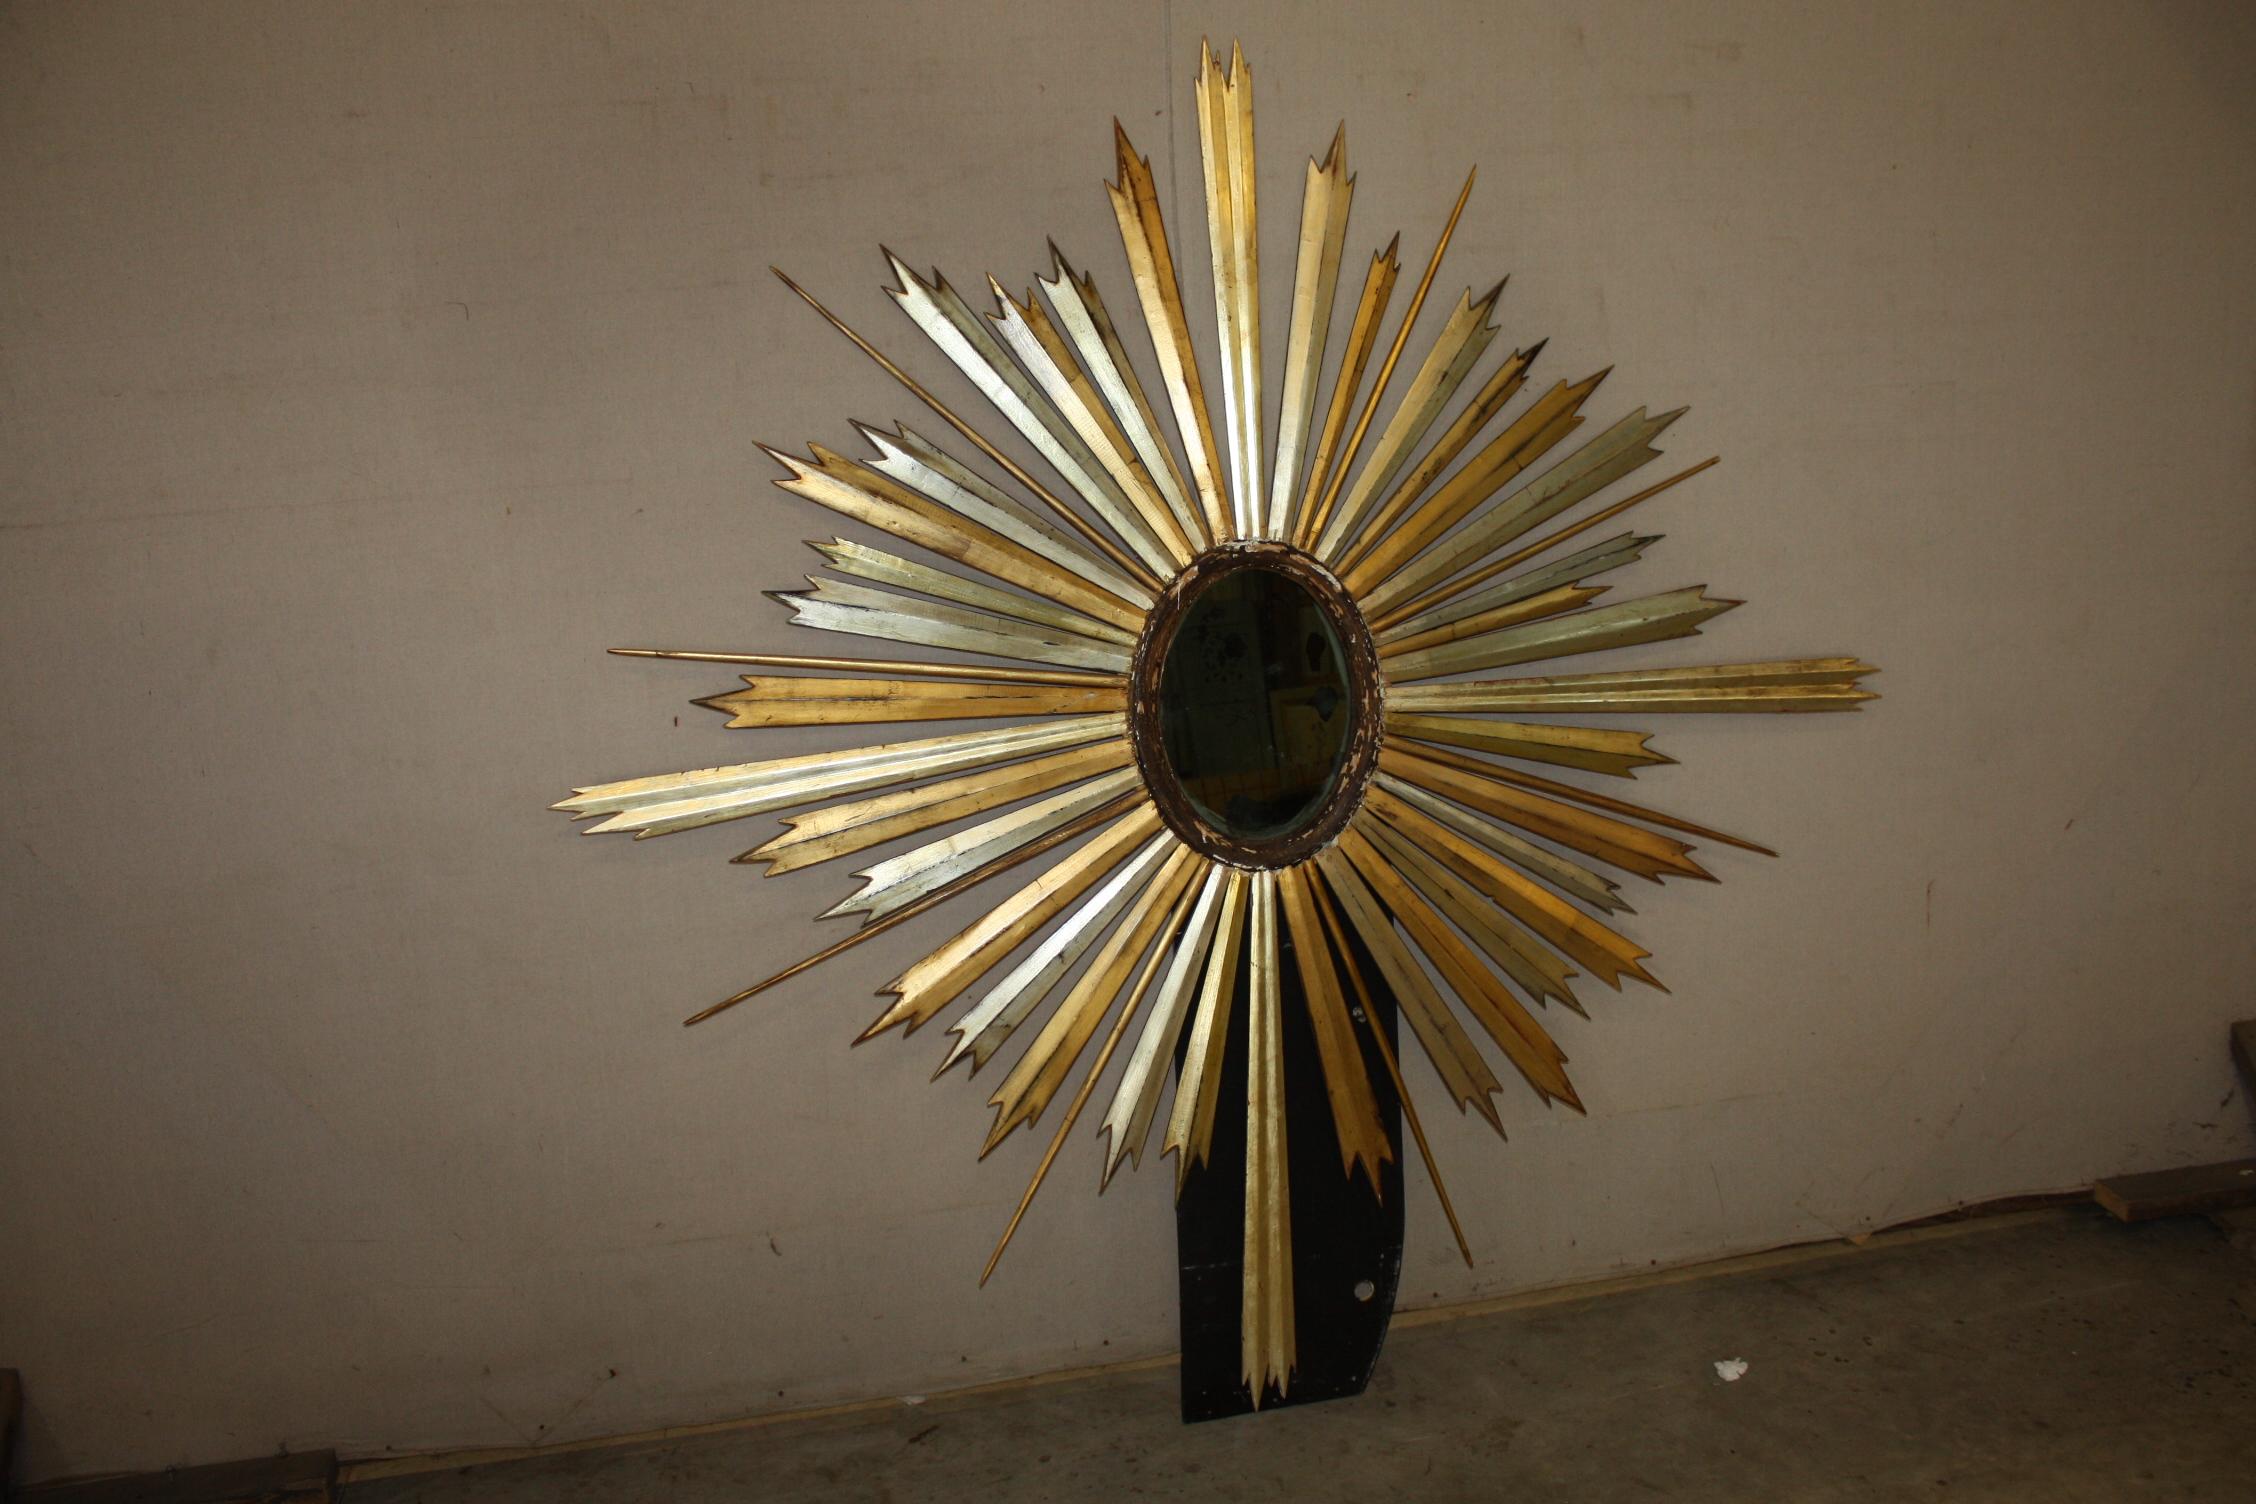 This is a great looking sunburst mirror from the 1800s. The glass is original and shows some age.